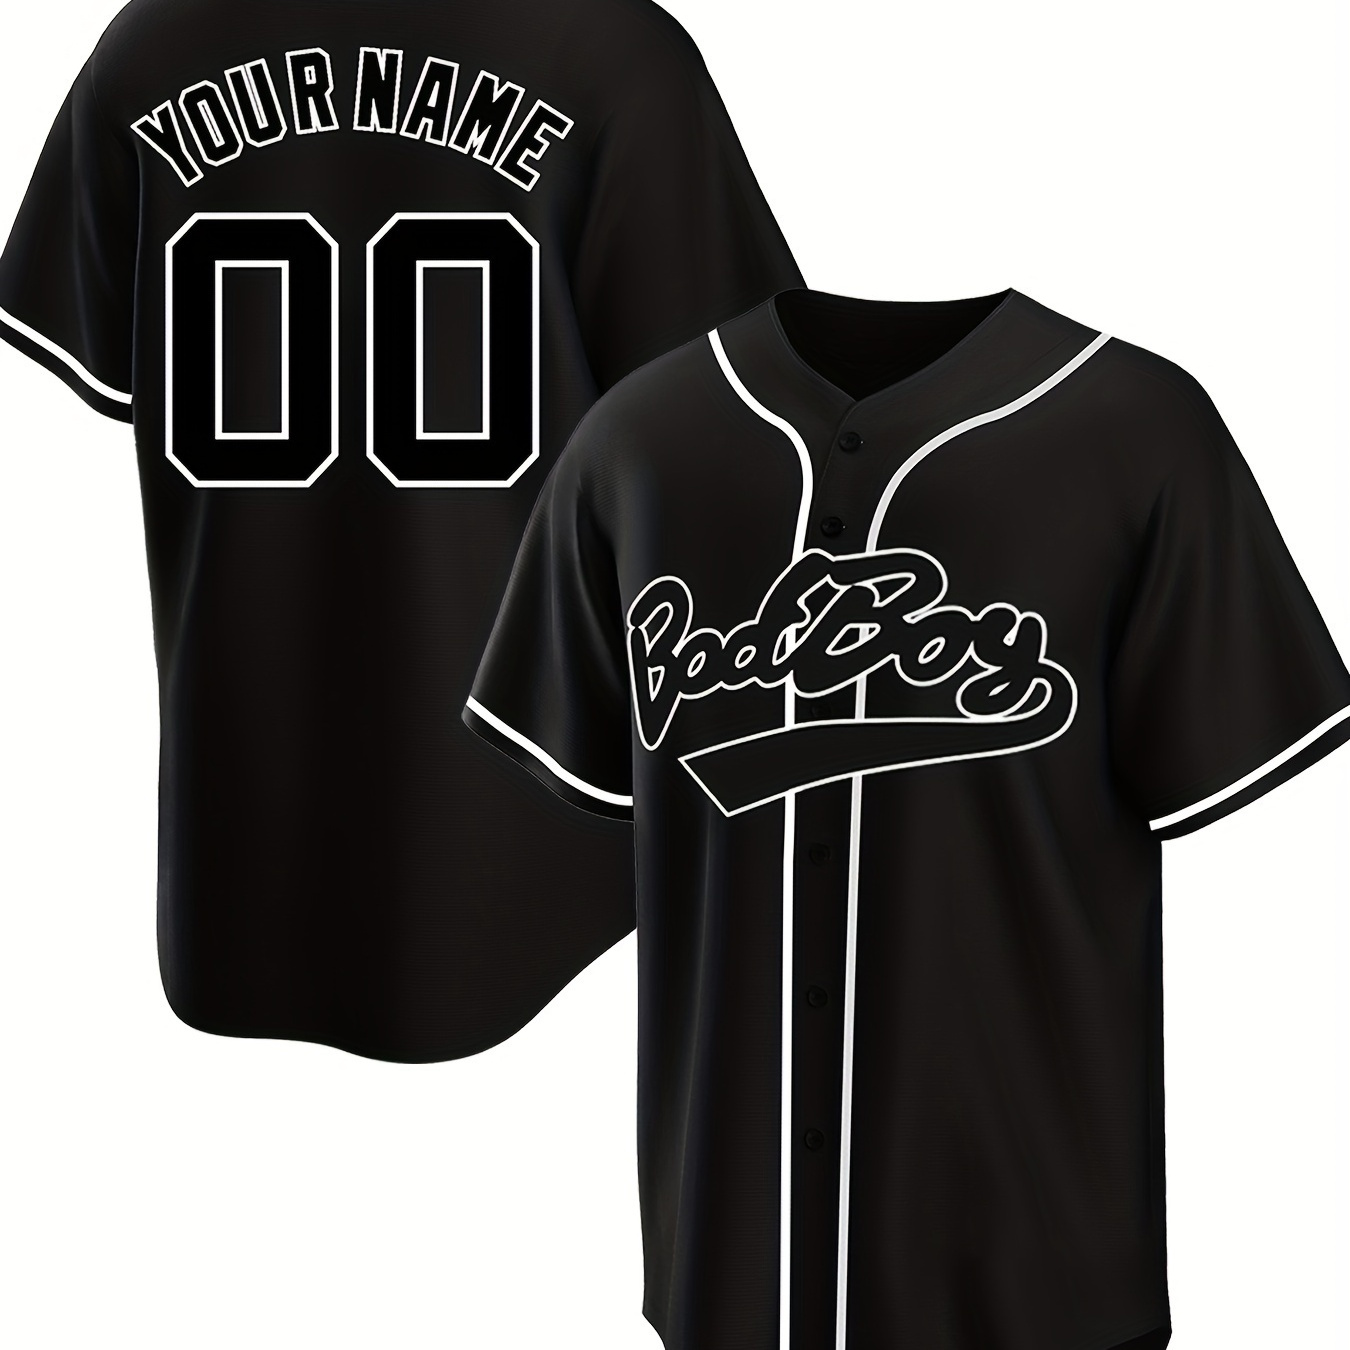 

Men's Personalized Customizable Baseball Jersey Shirt, Diy Name And Number Print Button Up Jersey For Competition Party Training